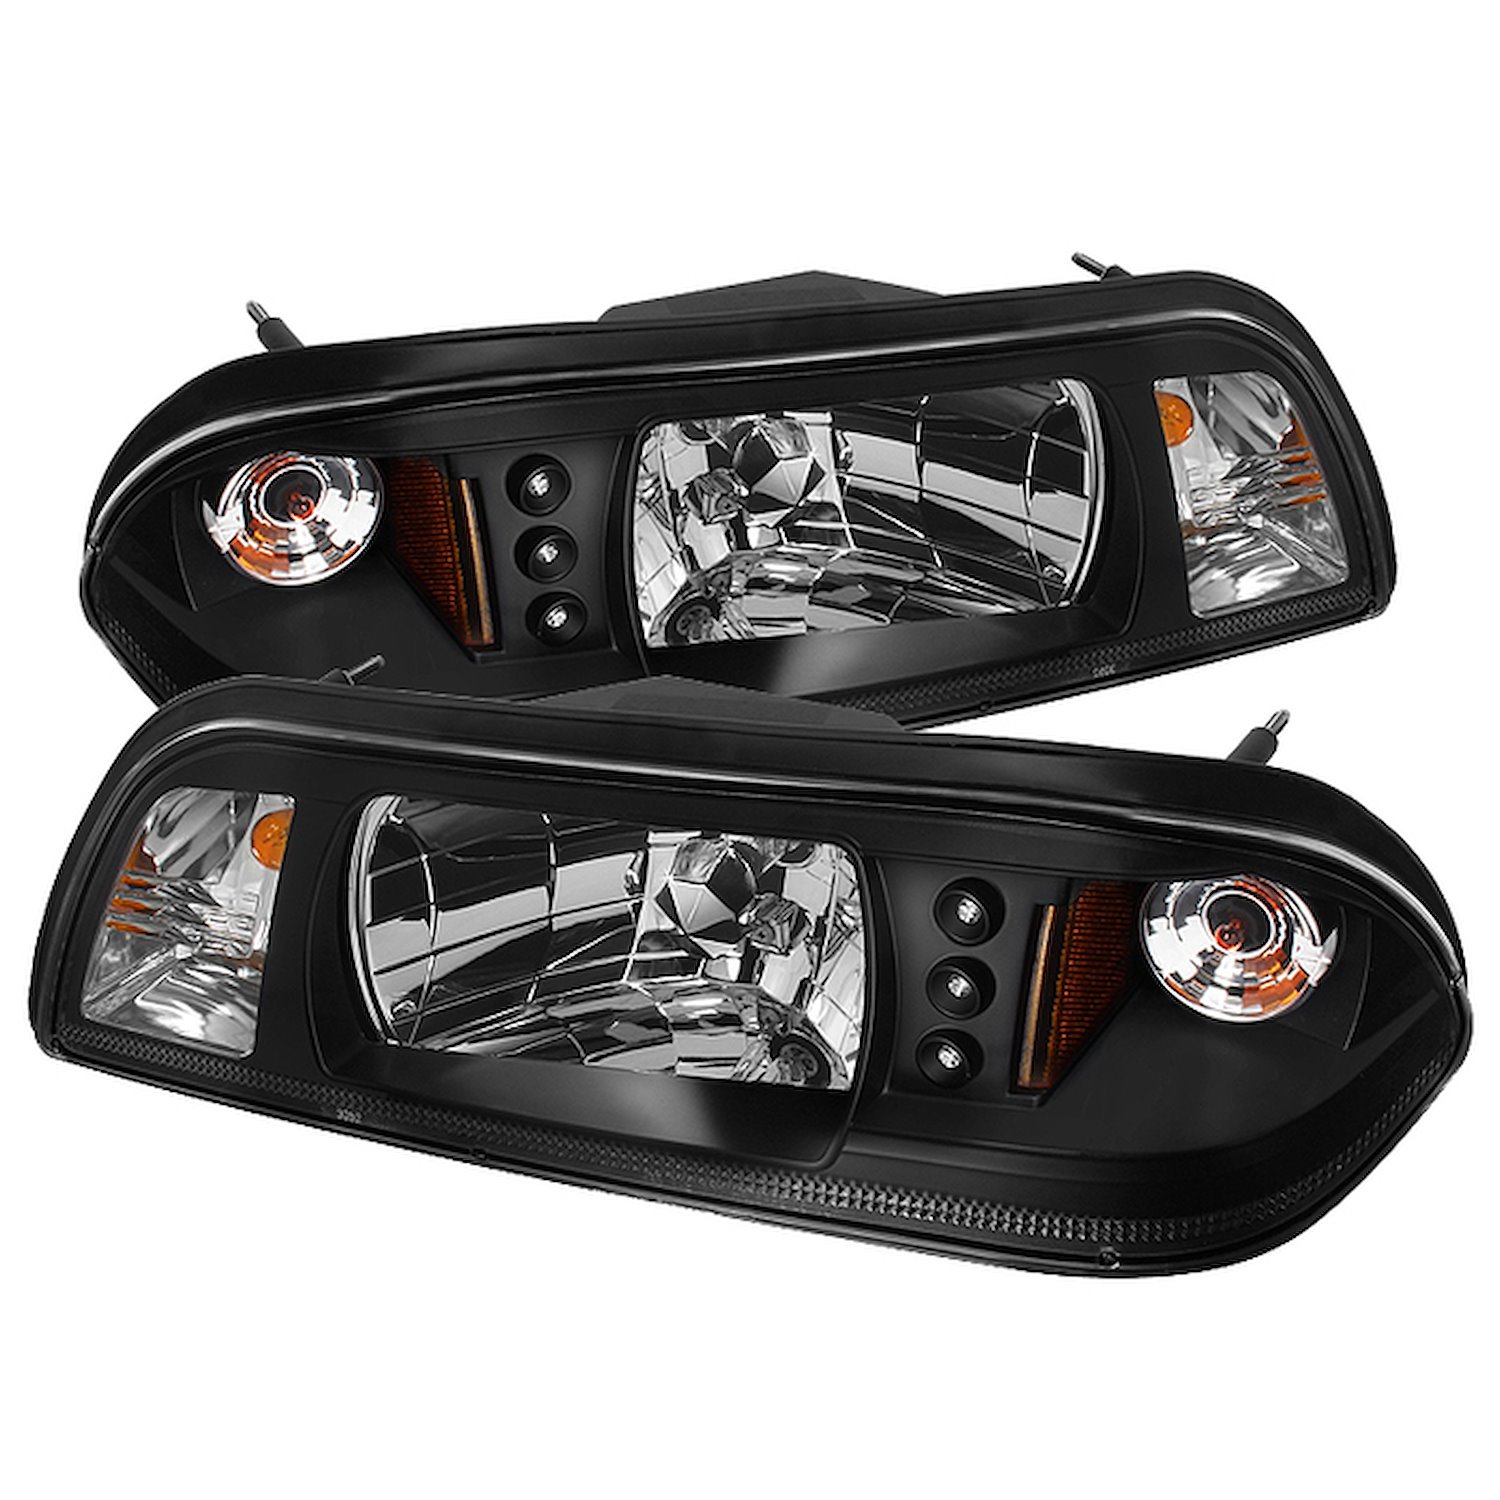 LED Crystal Headlights 1987-1993 Ford Mustang